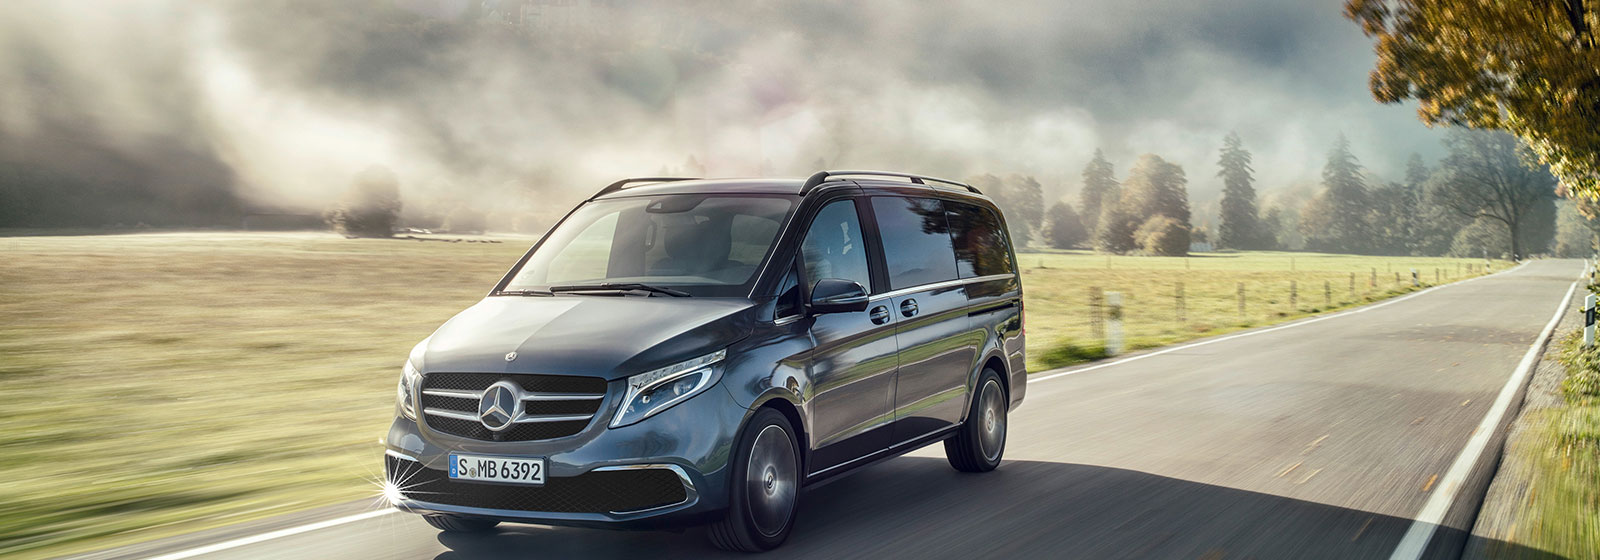 Mercedes V Class restyled version 2019